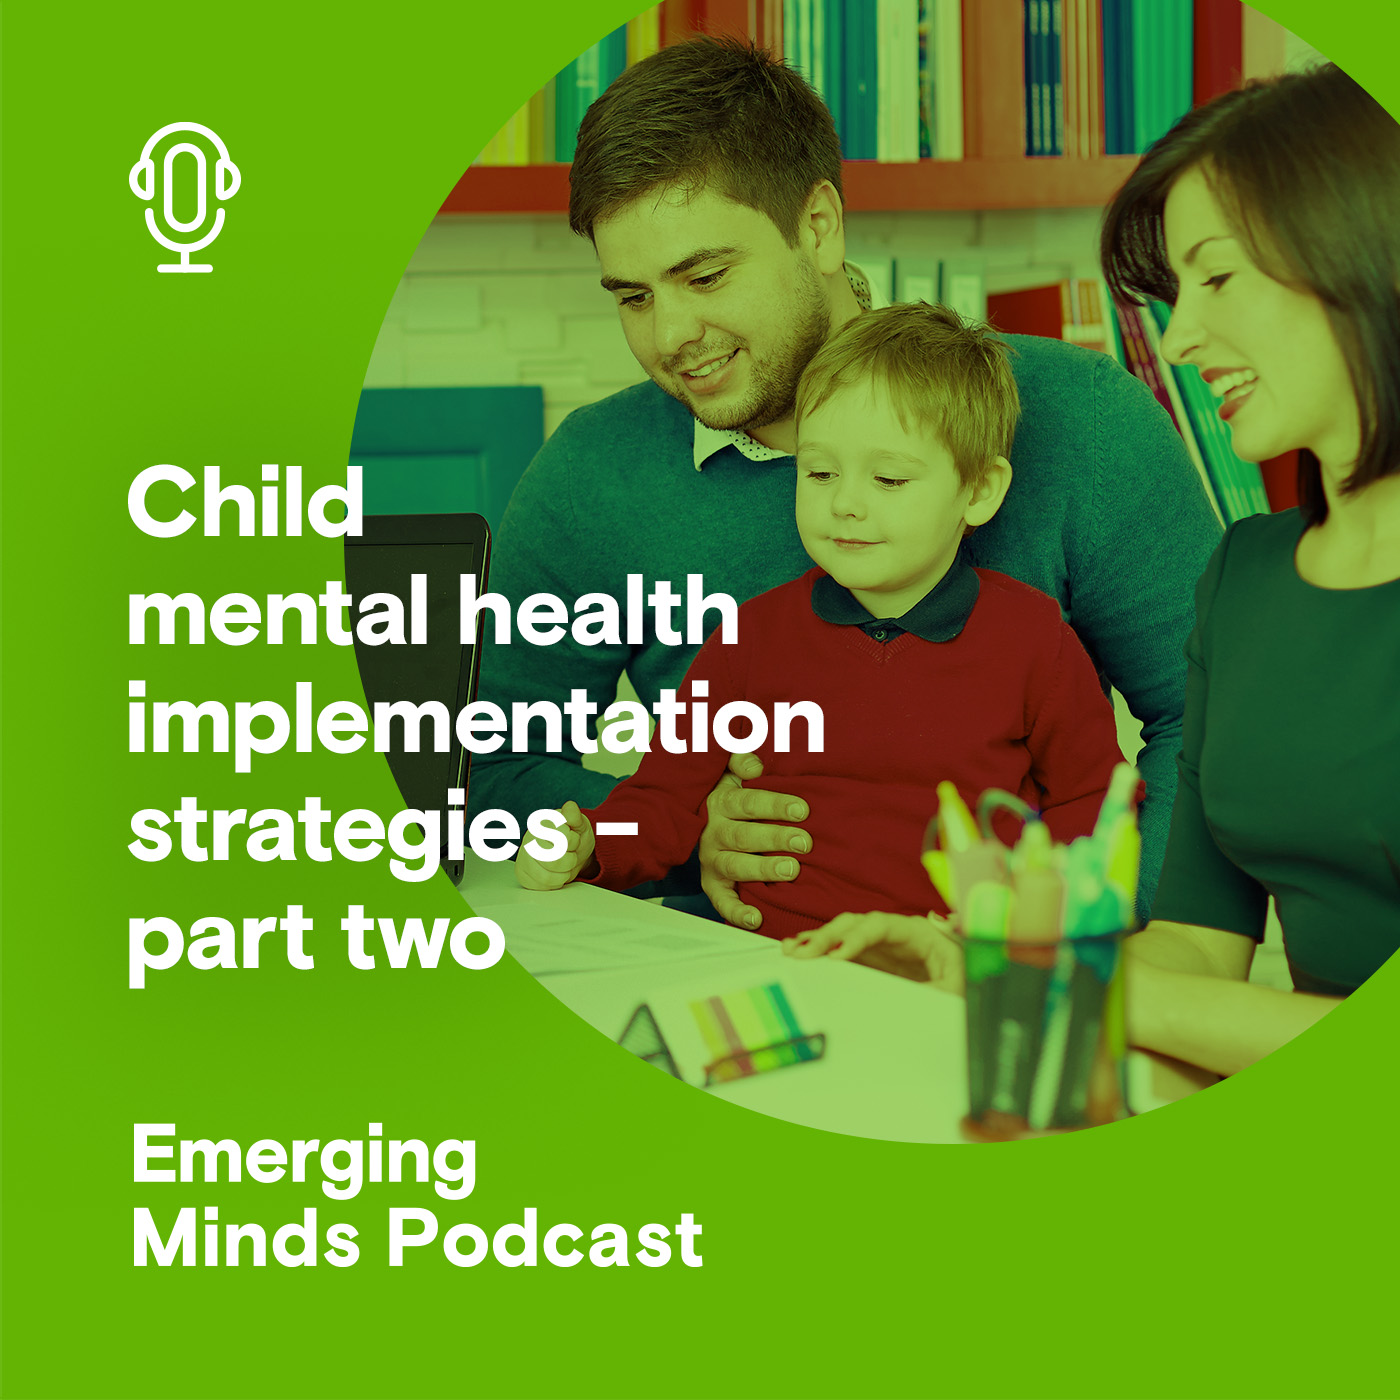 Child mental health implementation strategies - part two